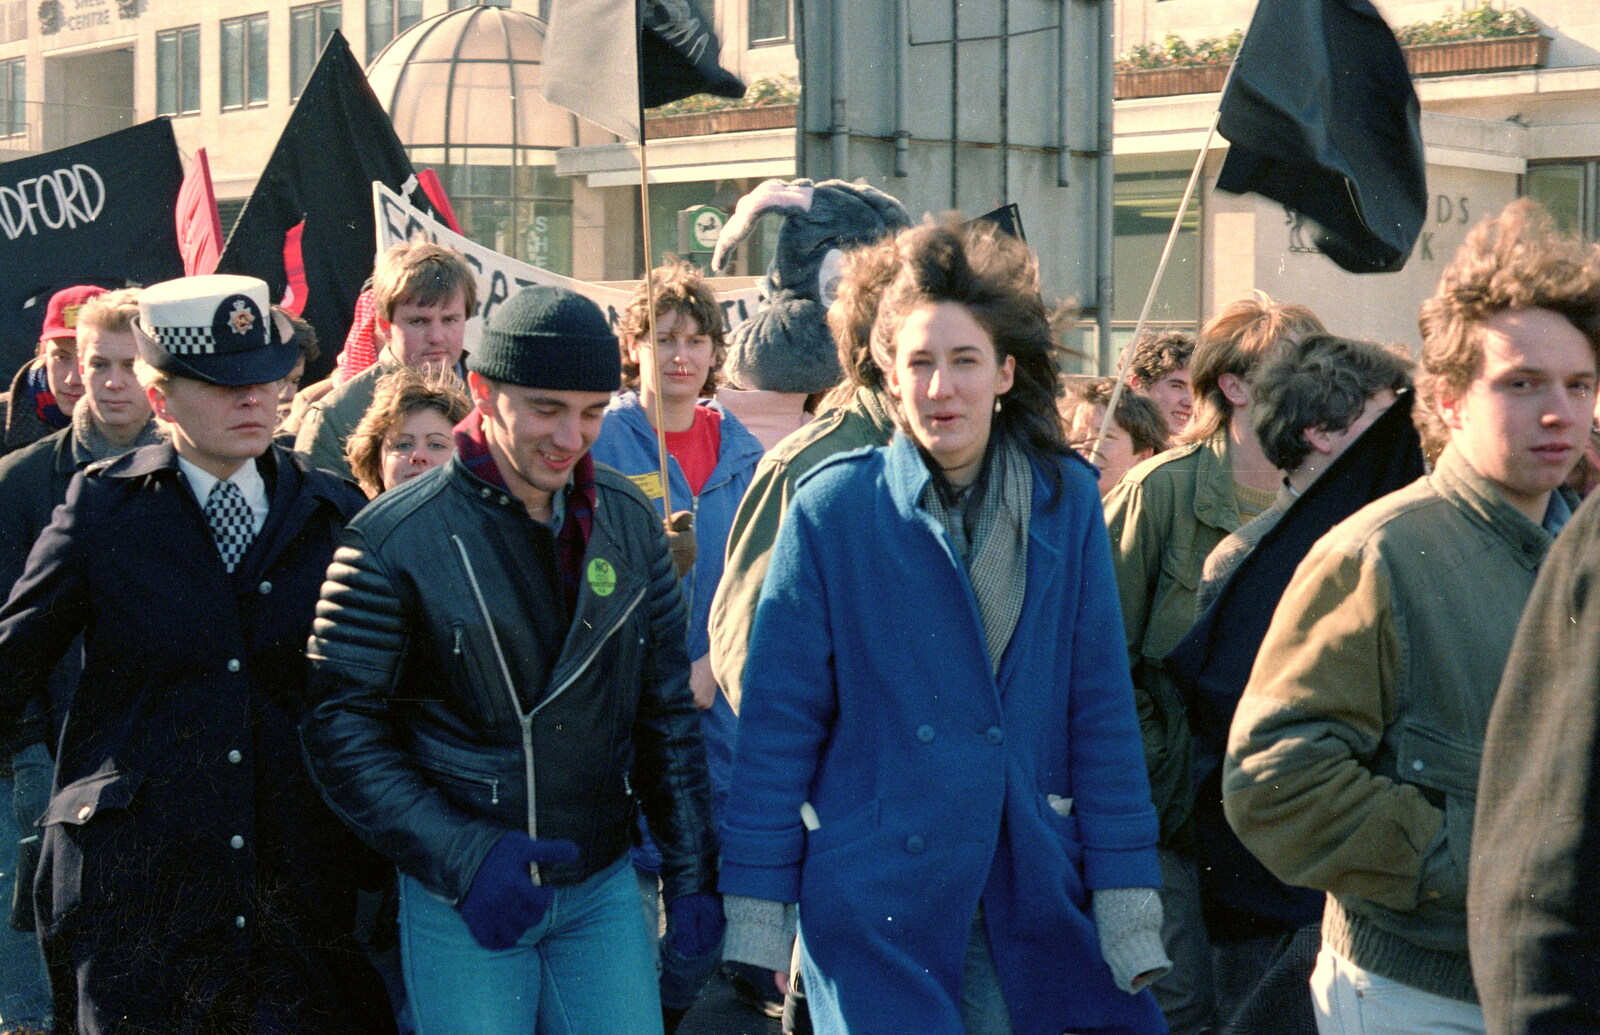 A policewoman accompanies the crowd from Uni: No Chance Fowler! A student Demonstration, London - 26th February 1986